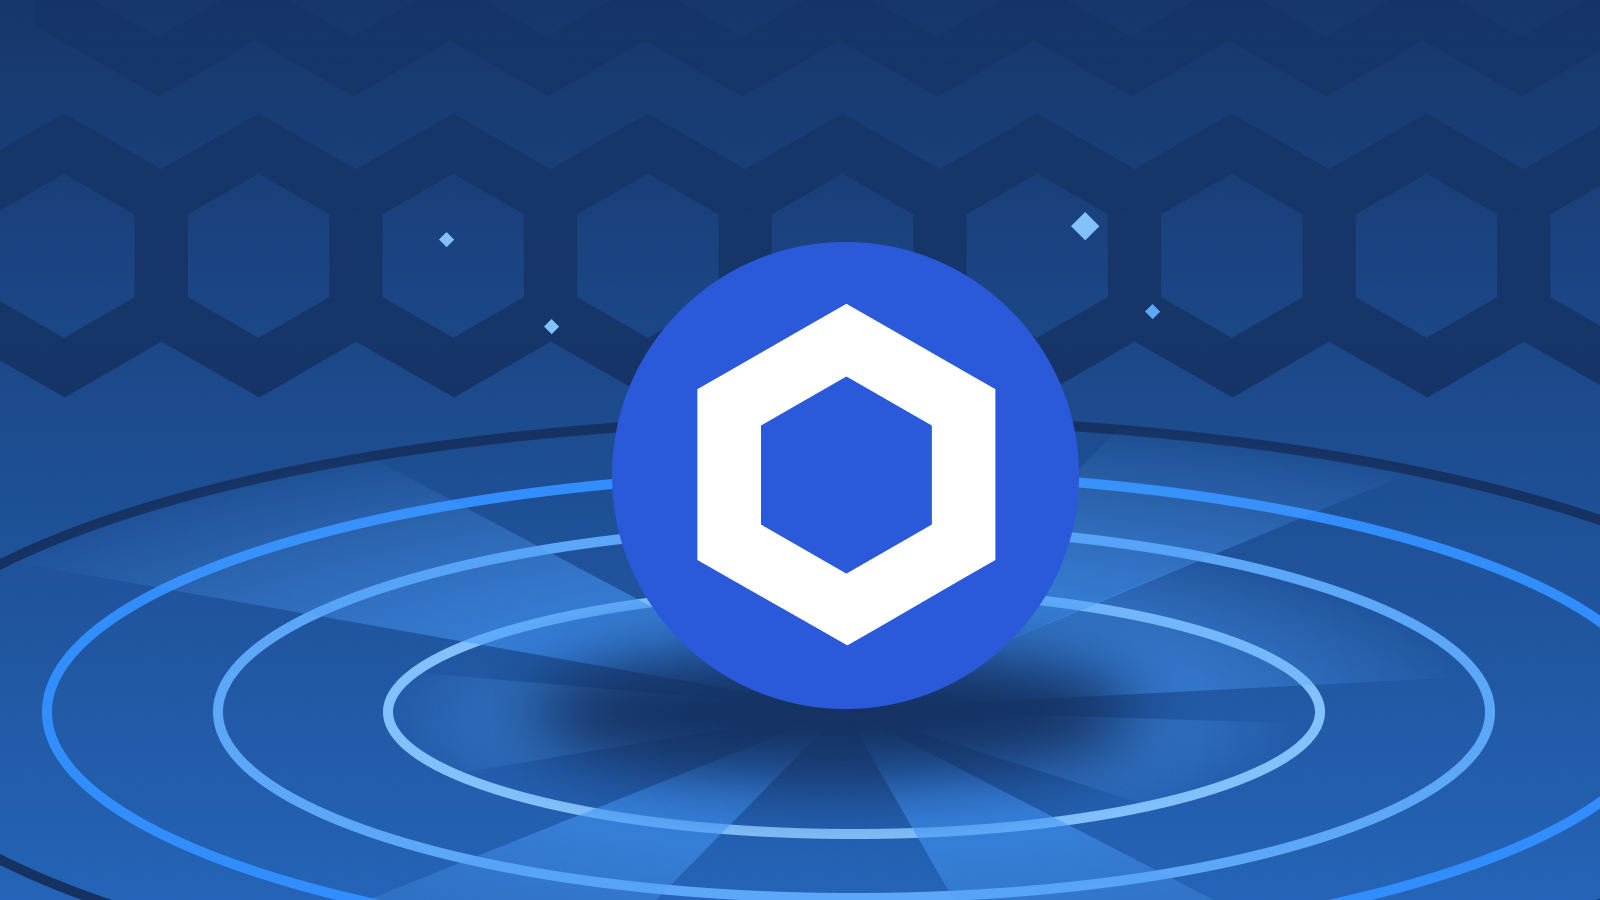 The logo of Chainlink (LINK)